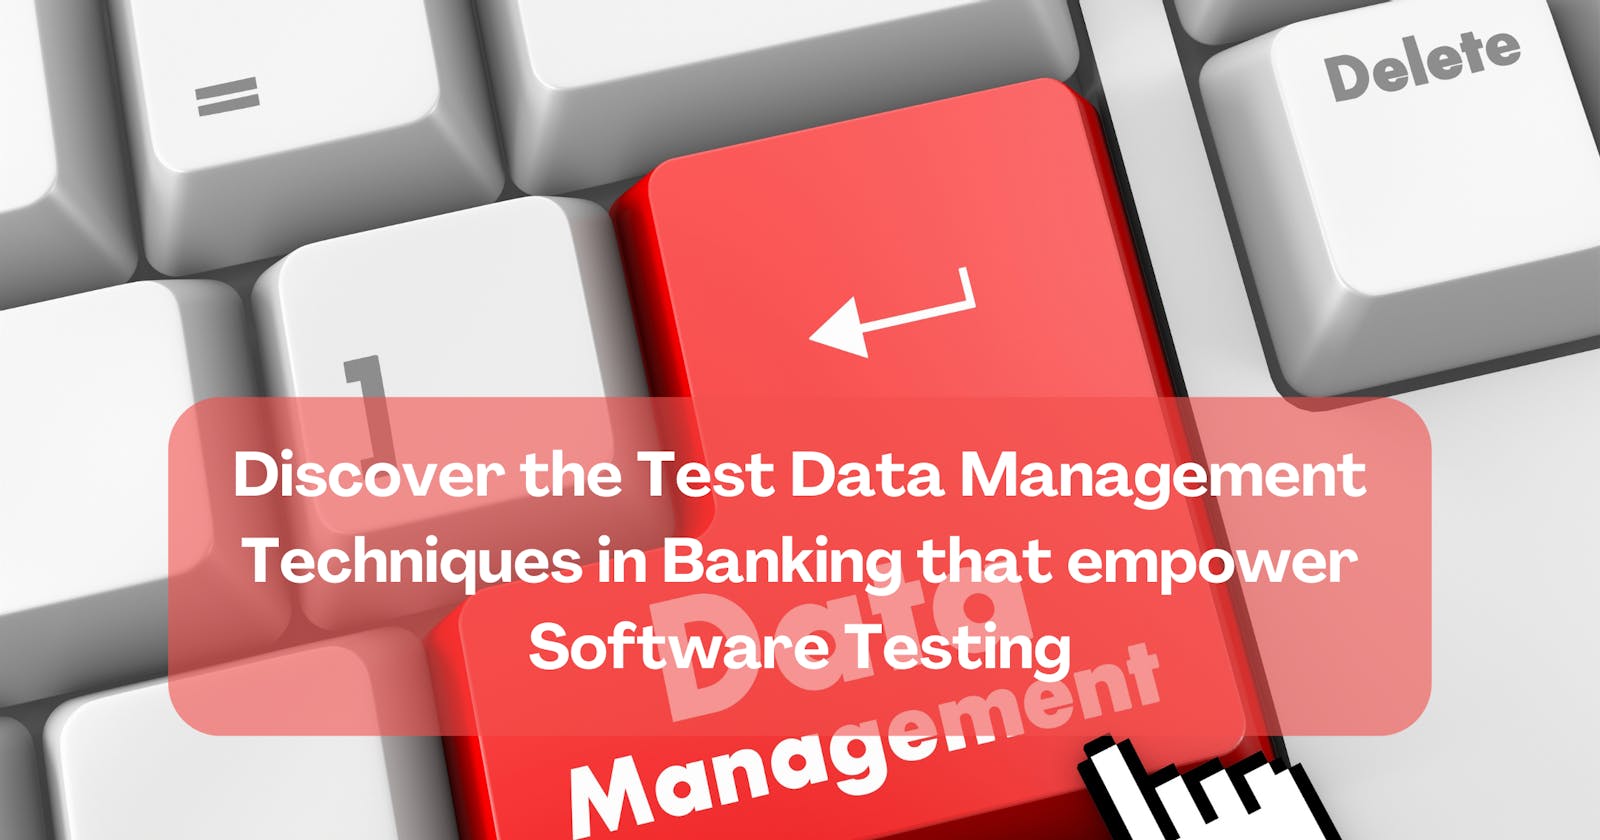 Discover the Test Data Management Techniques in Banking that empower Software Testing